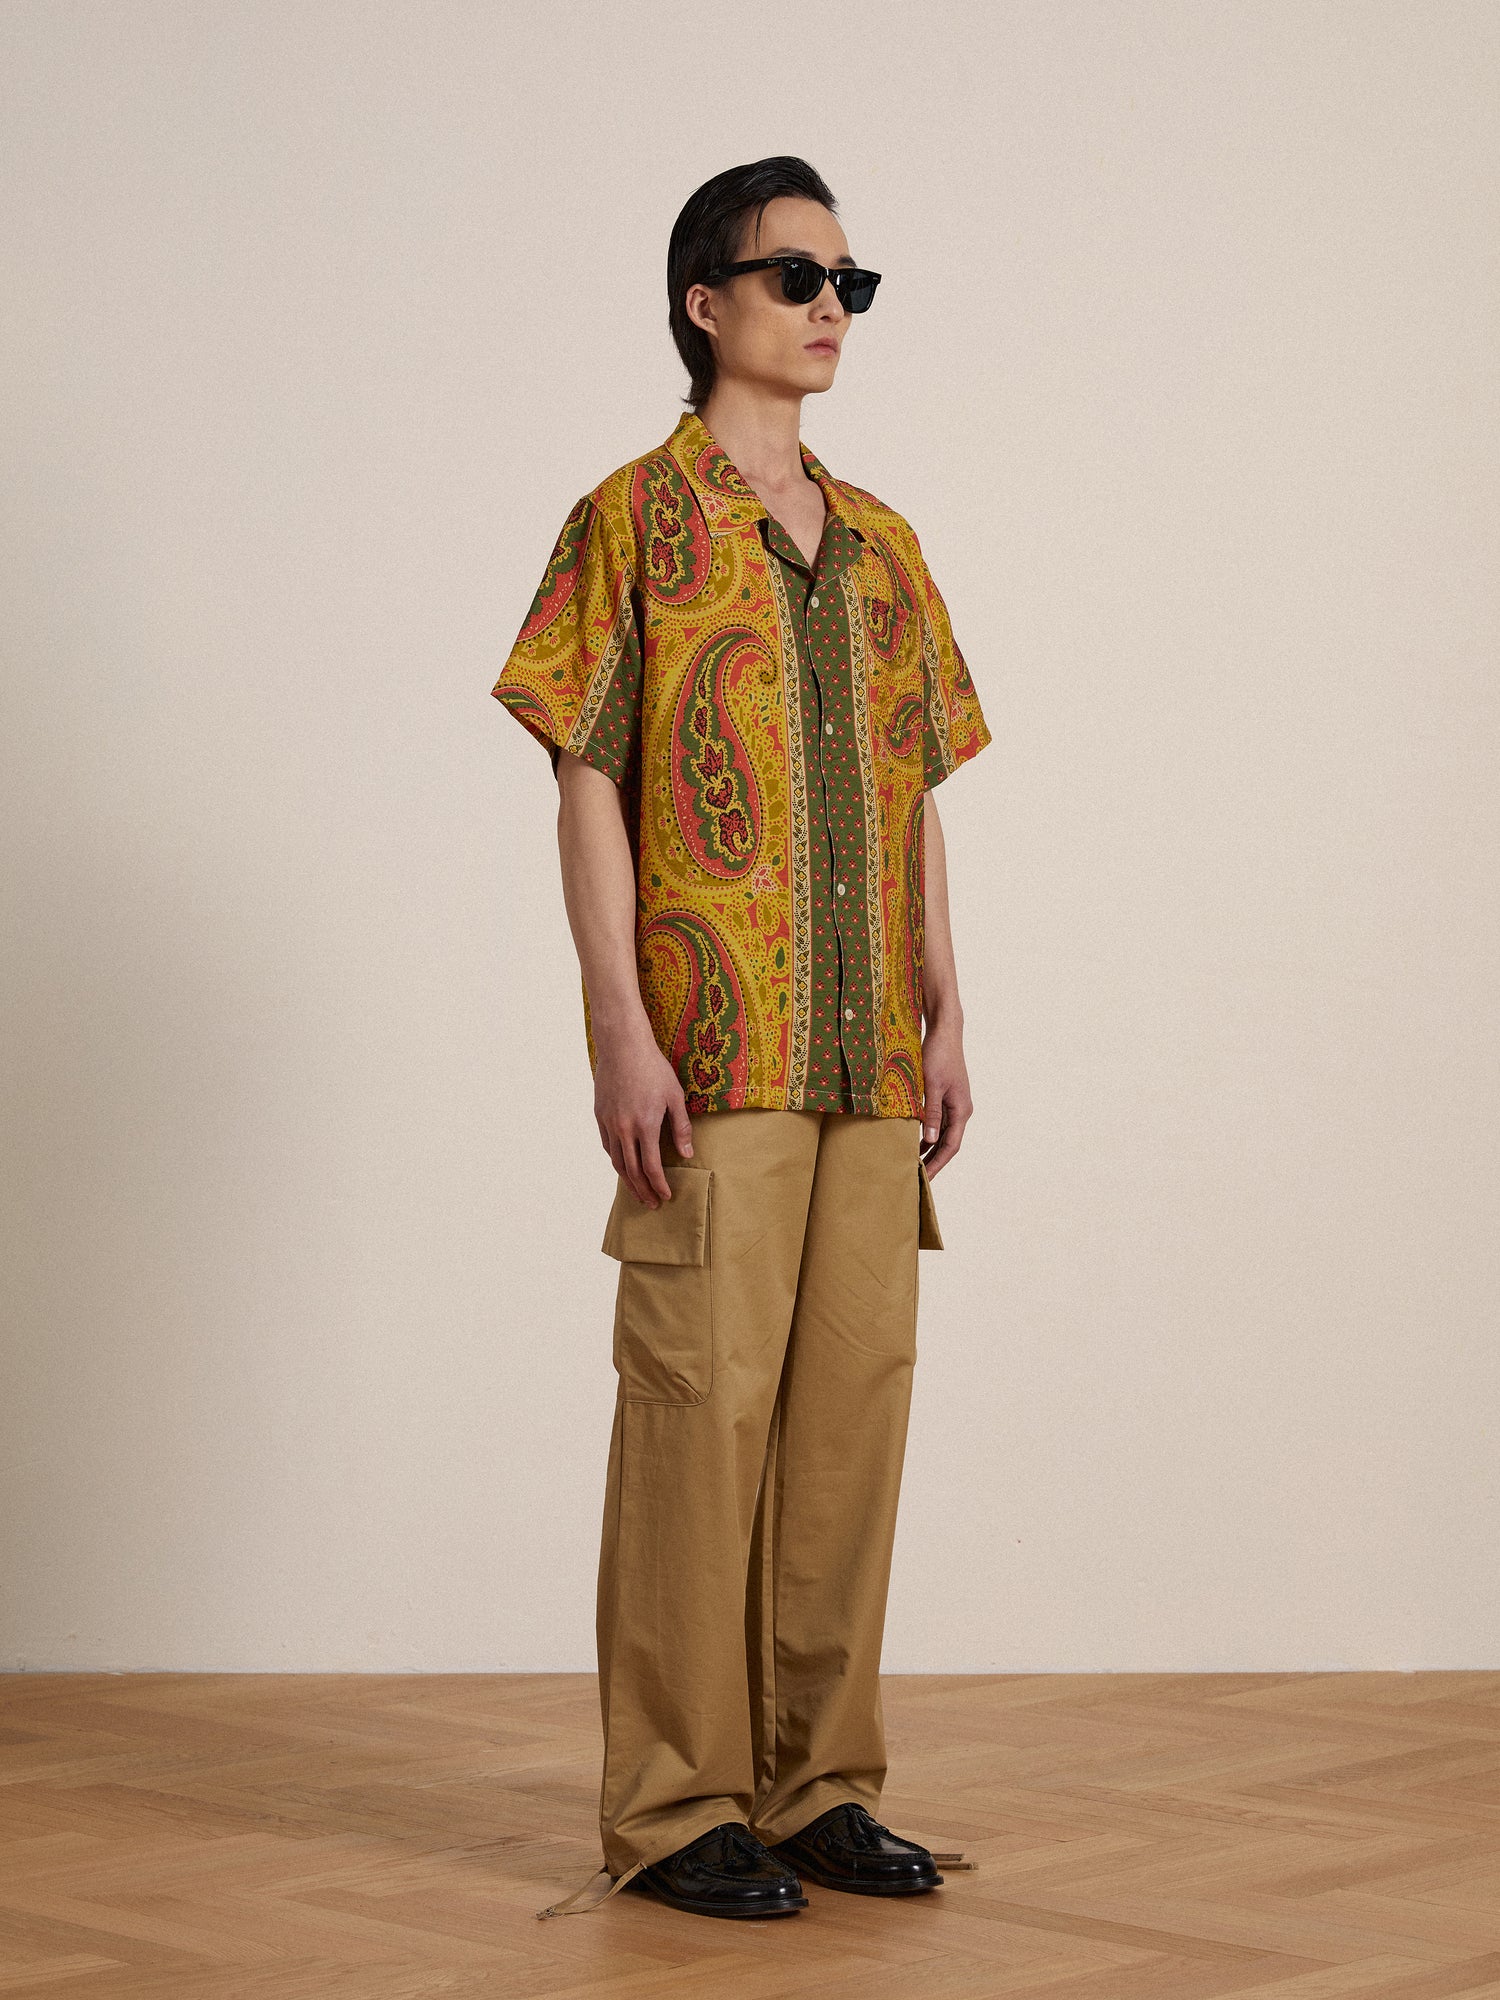 A man wearing a Found Pench Paisley SS Camp Shirt with paisley prints and khaki pants.